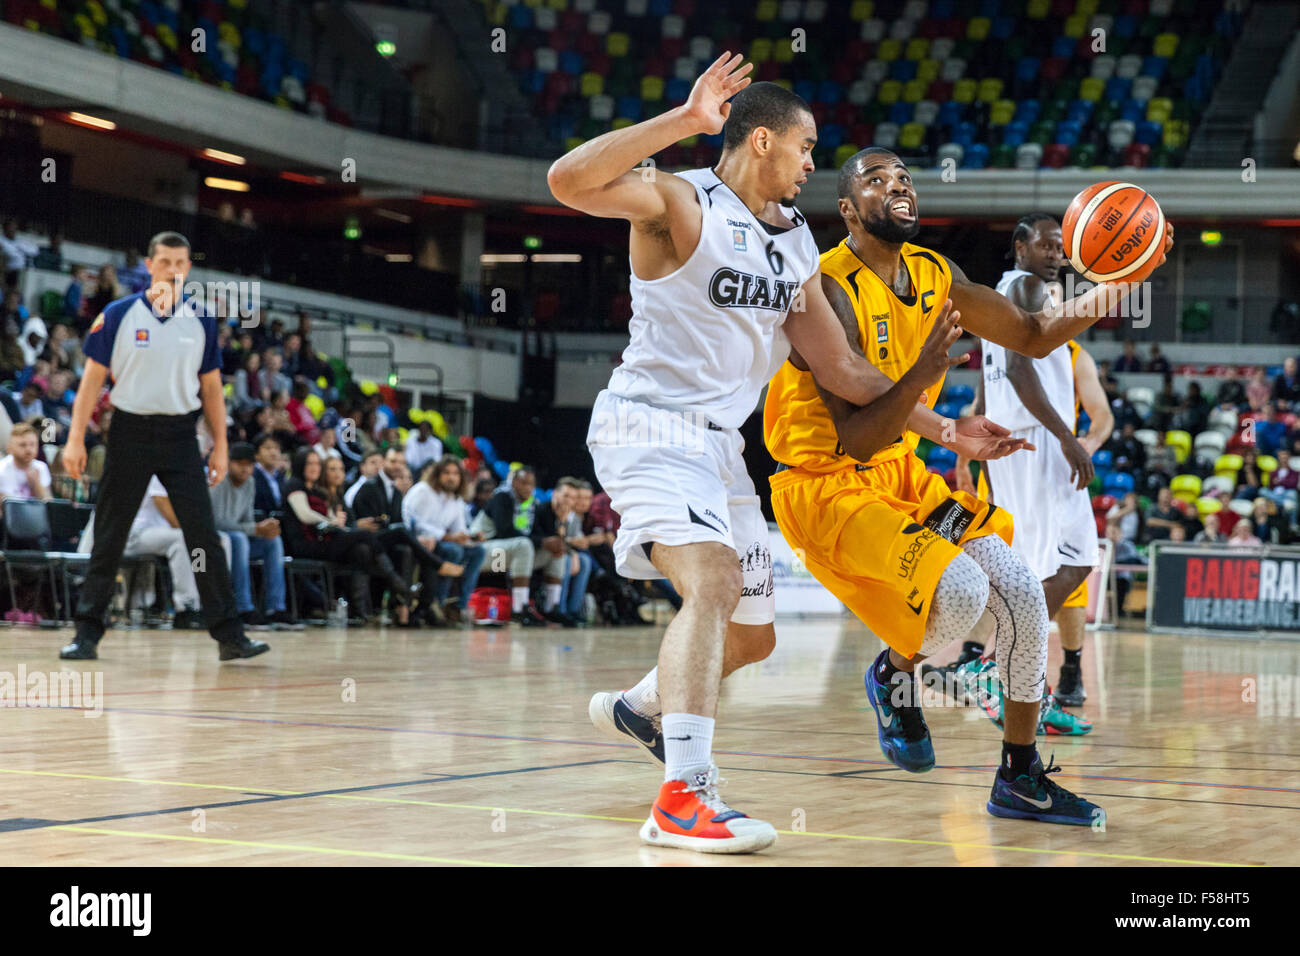 London, UK. 29th Oct, 2015. Lions player Jaron Lane (5) drives the ball forward with Manchester's Sam Attah (6) trying to block during the London Lions vs. Manchester Giants BBL game at the Copper Box Arena in the Olympic Park. Manchester Giants win 90-82. Credit:  Imageplotter/Alamy Live News Stock Photo